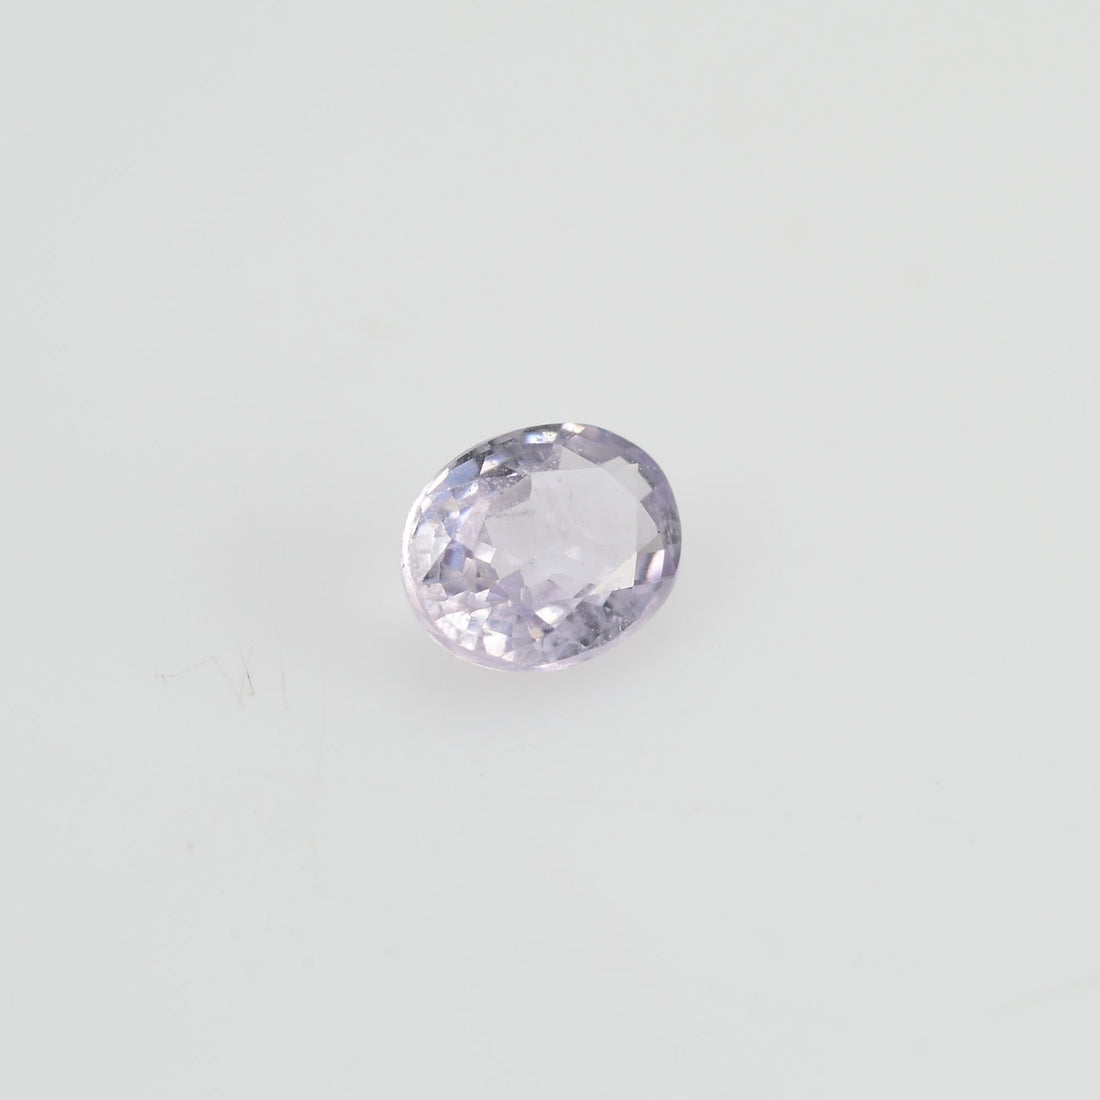 0.25 cts Natural Lavender Sapphire Loose Gemstone Oval Cut